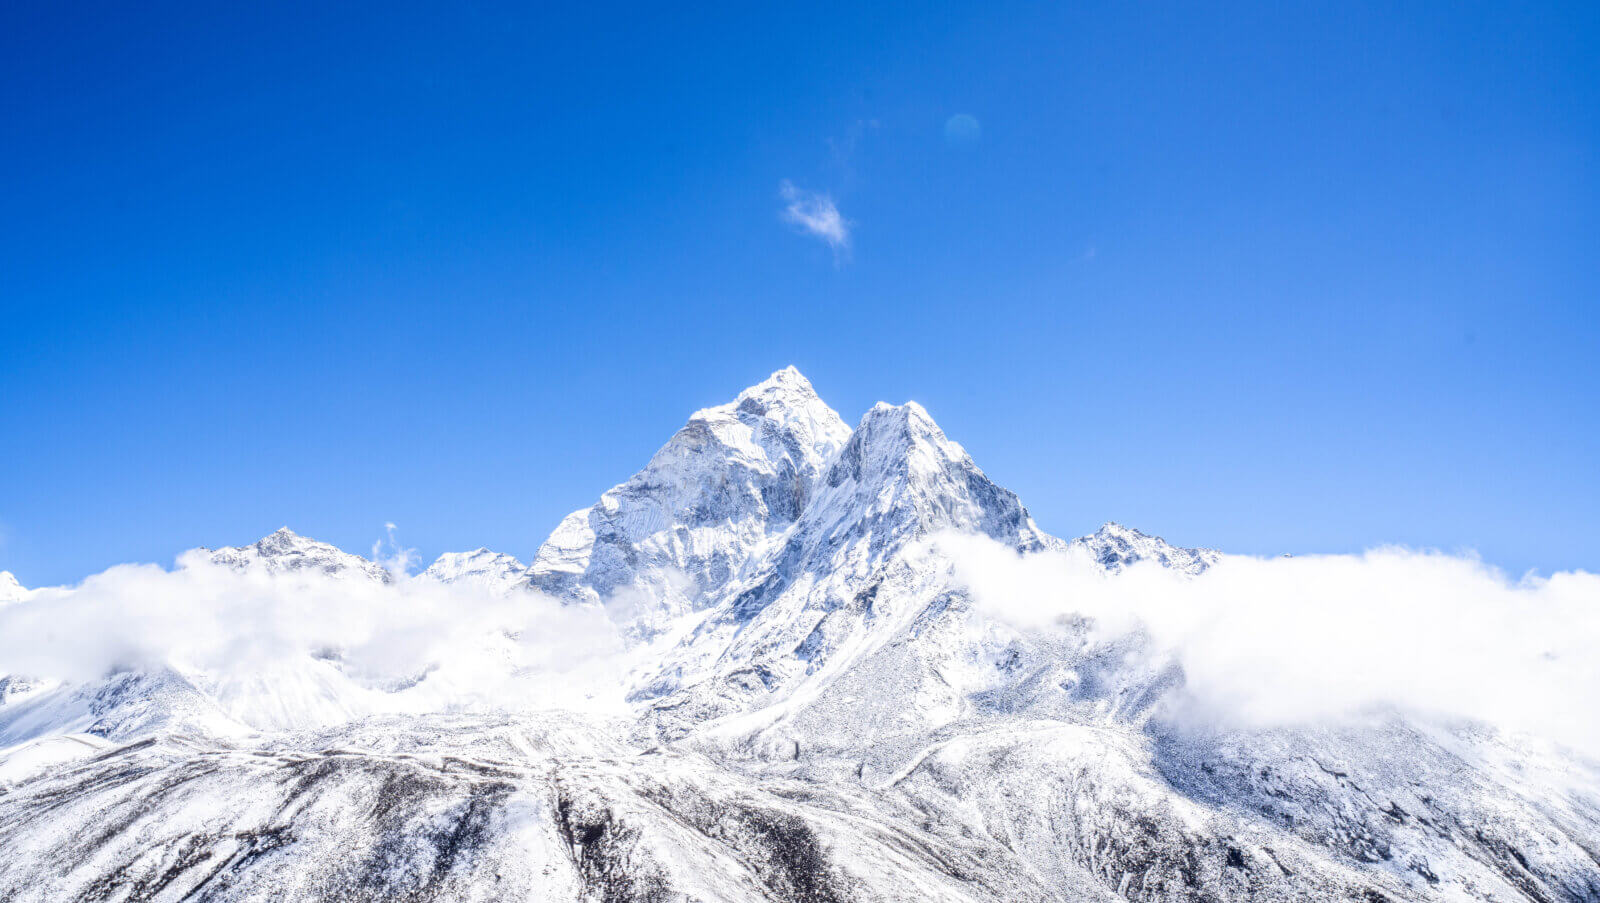 The north side of Ama Dablam above the clouds.